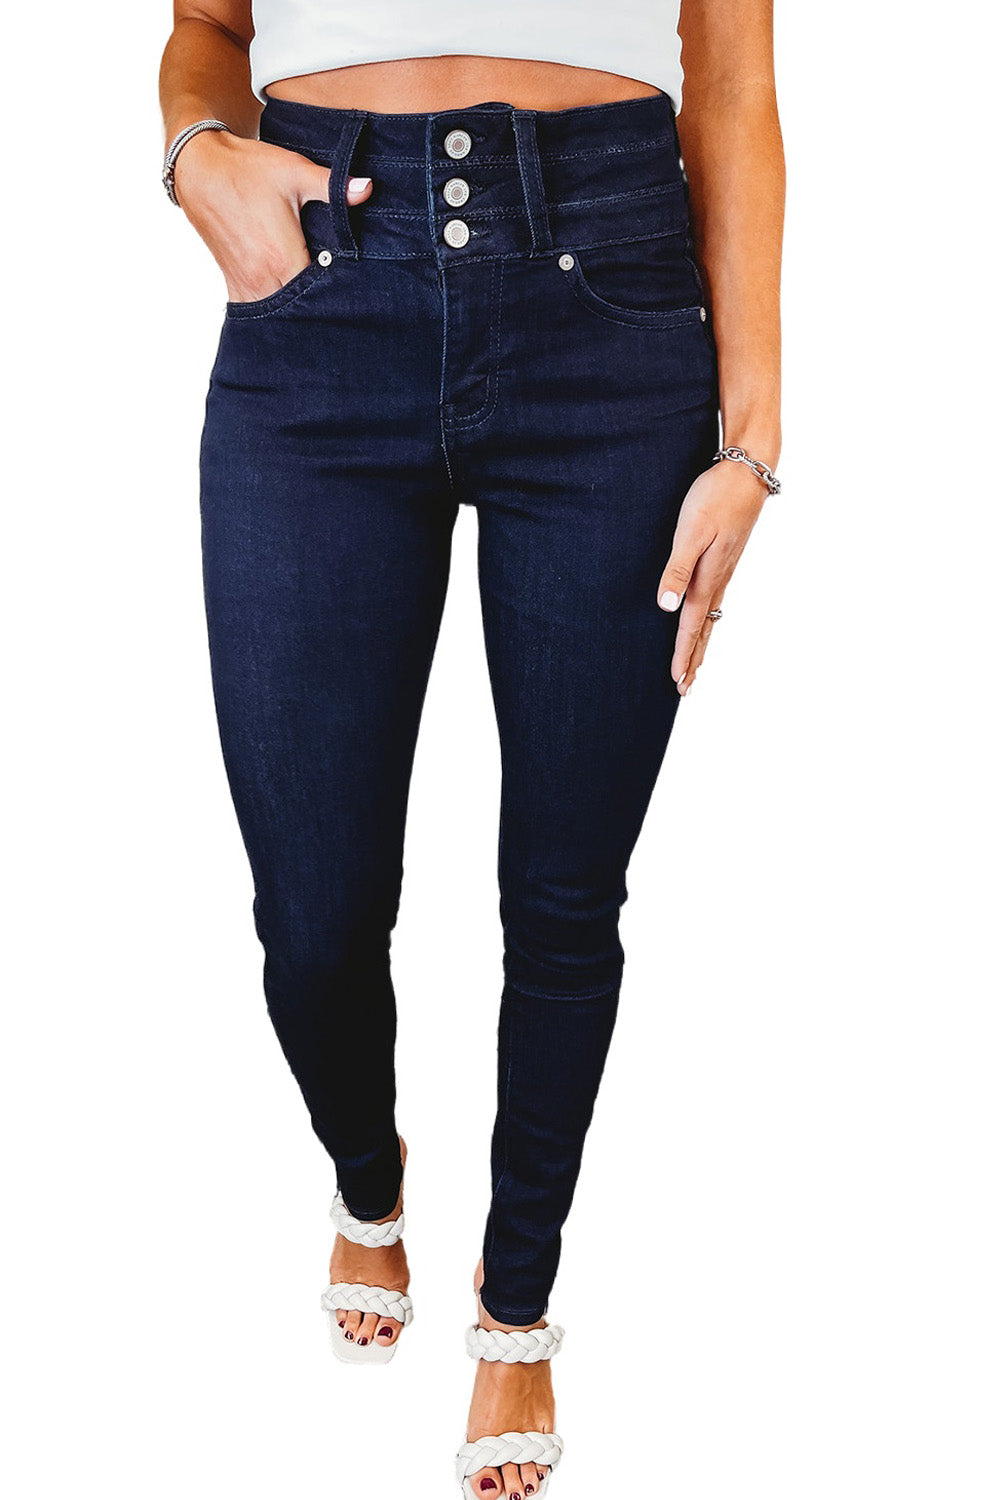 Blue Button Fly High Waist Skinny Jeans Jeans JT's Designer Fashion